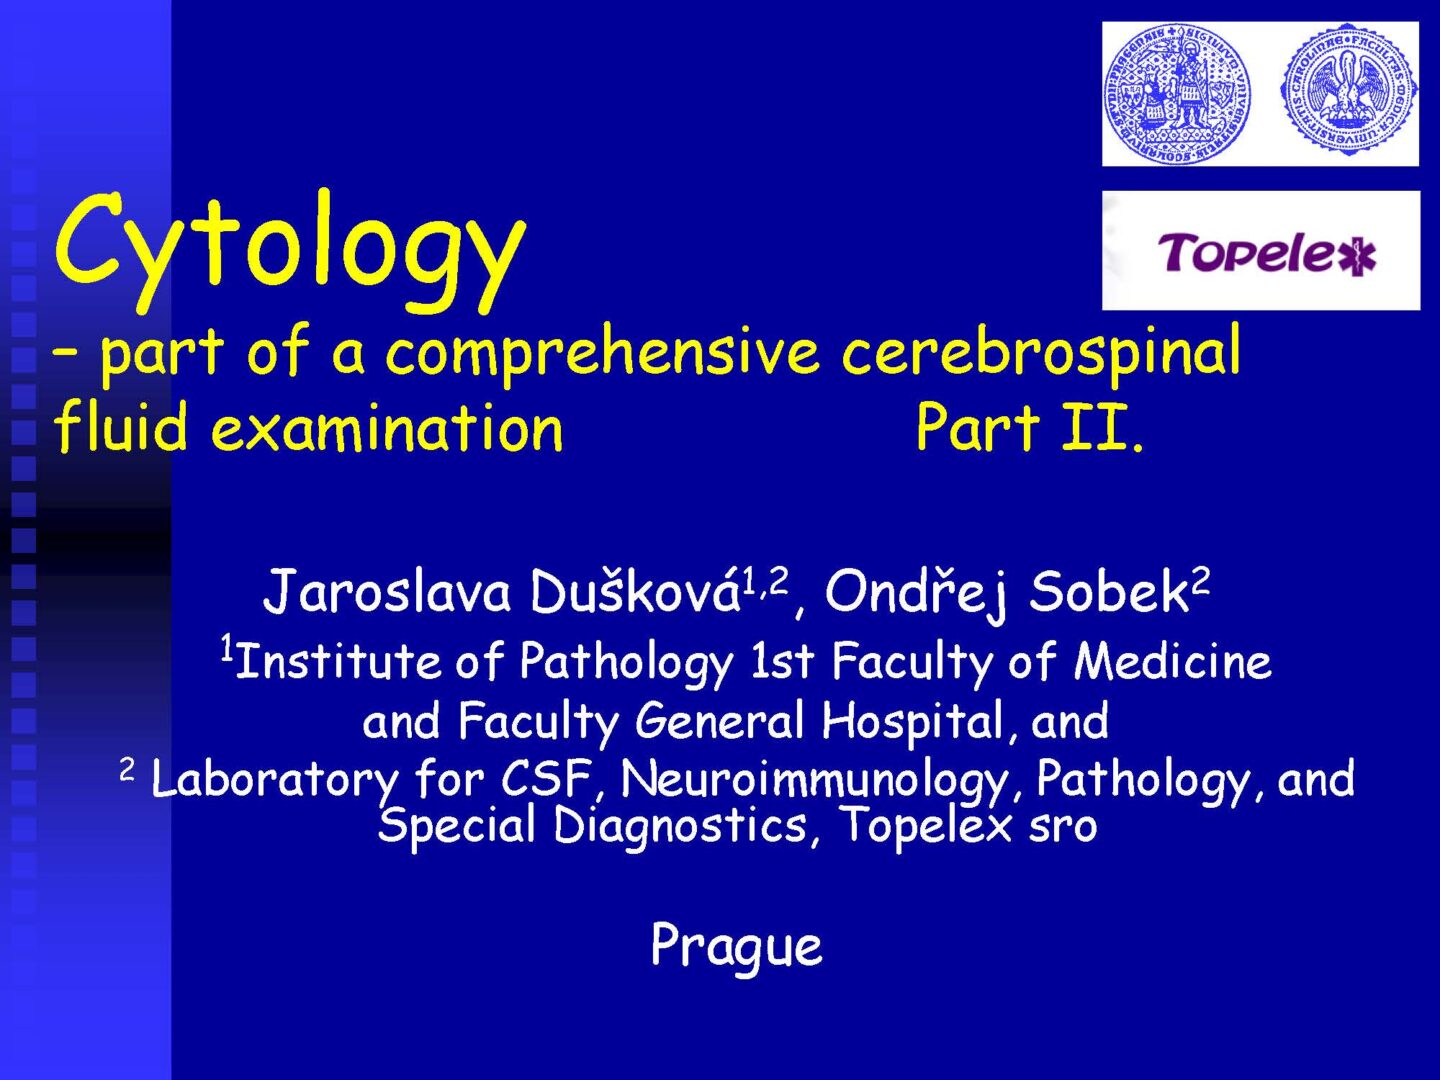 Cytology of the Cerebrospinal fluid - part II_Pagina_01